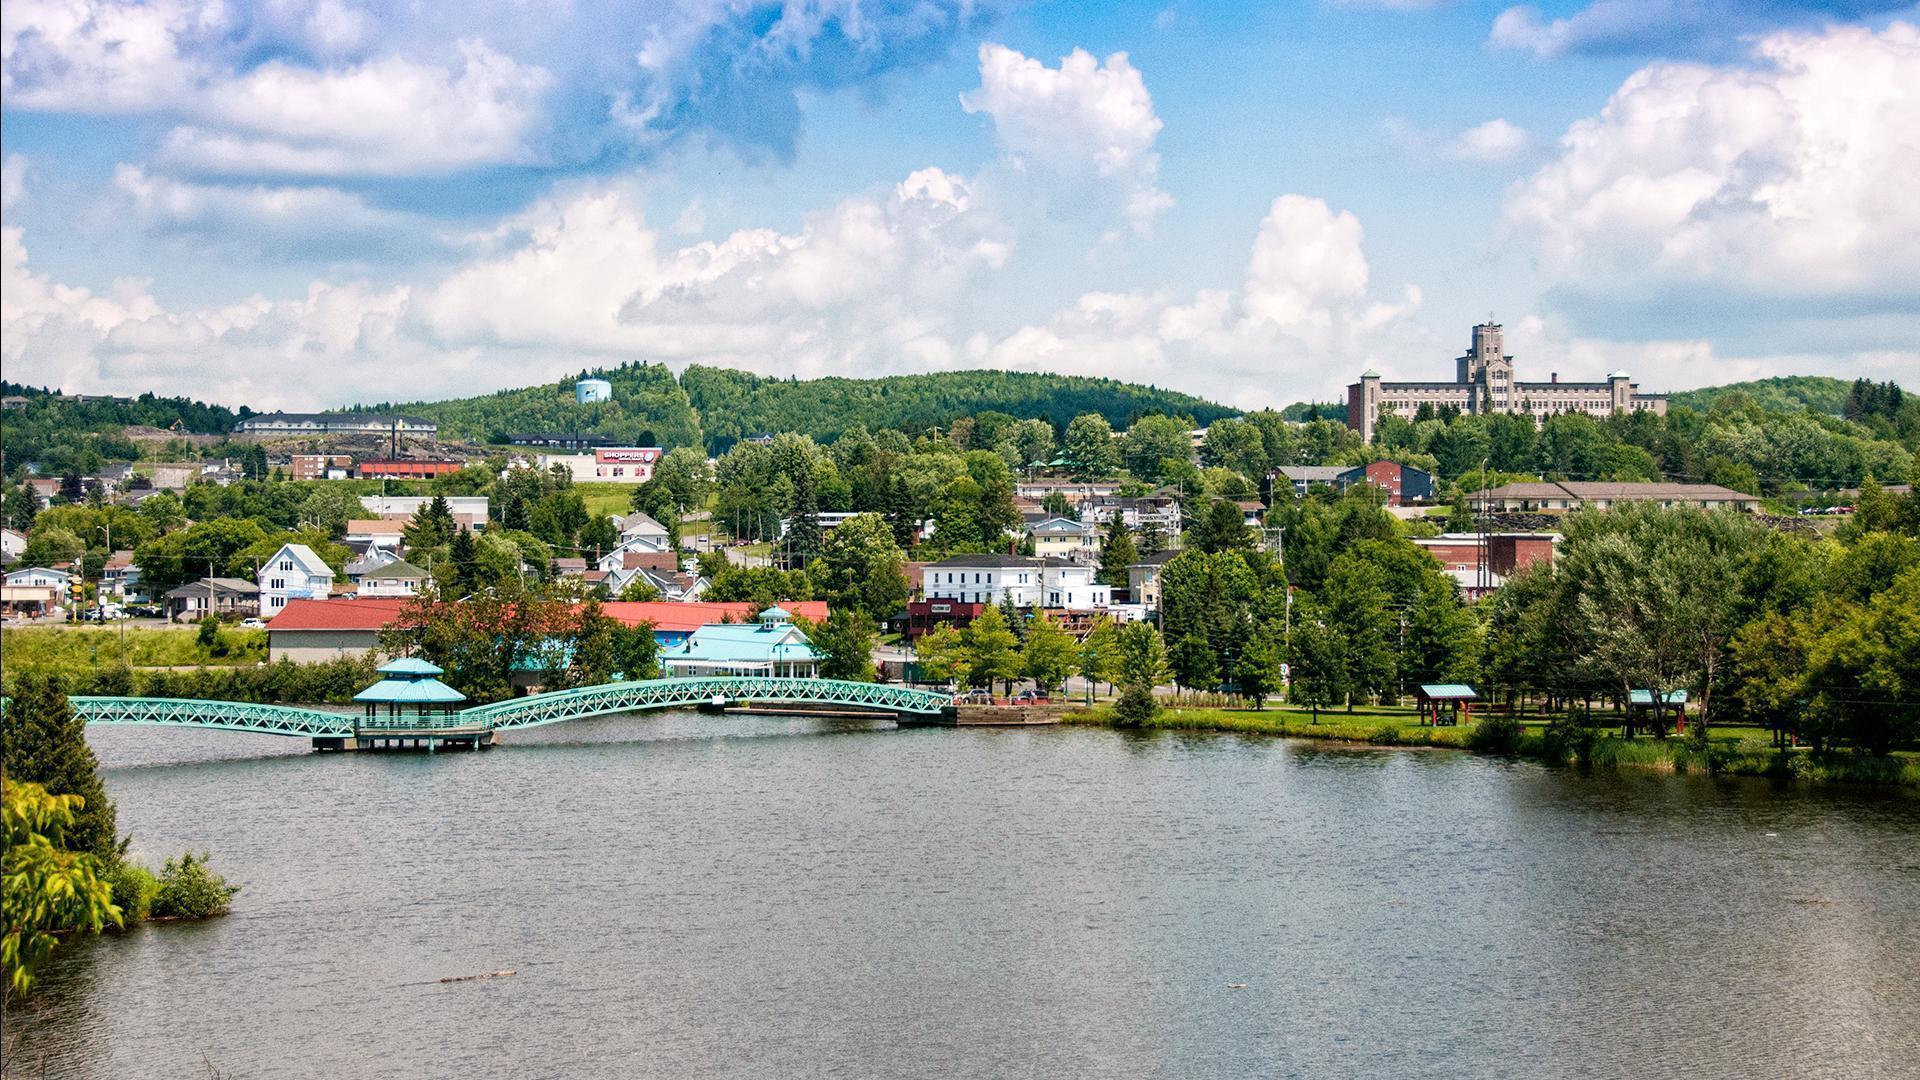 Edmundston, NB, is the perfect base to discover Brayon culture and the Republic of Madawaska